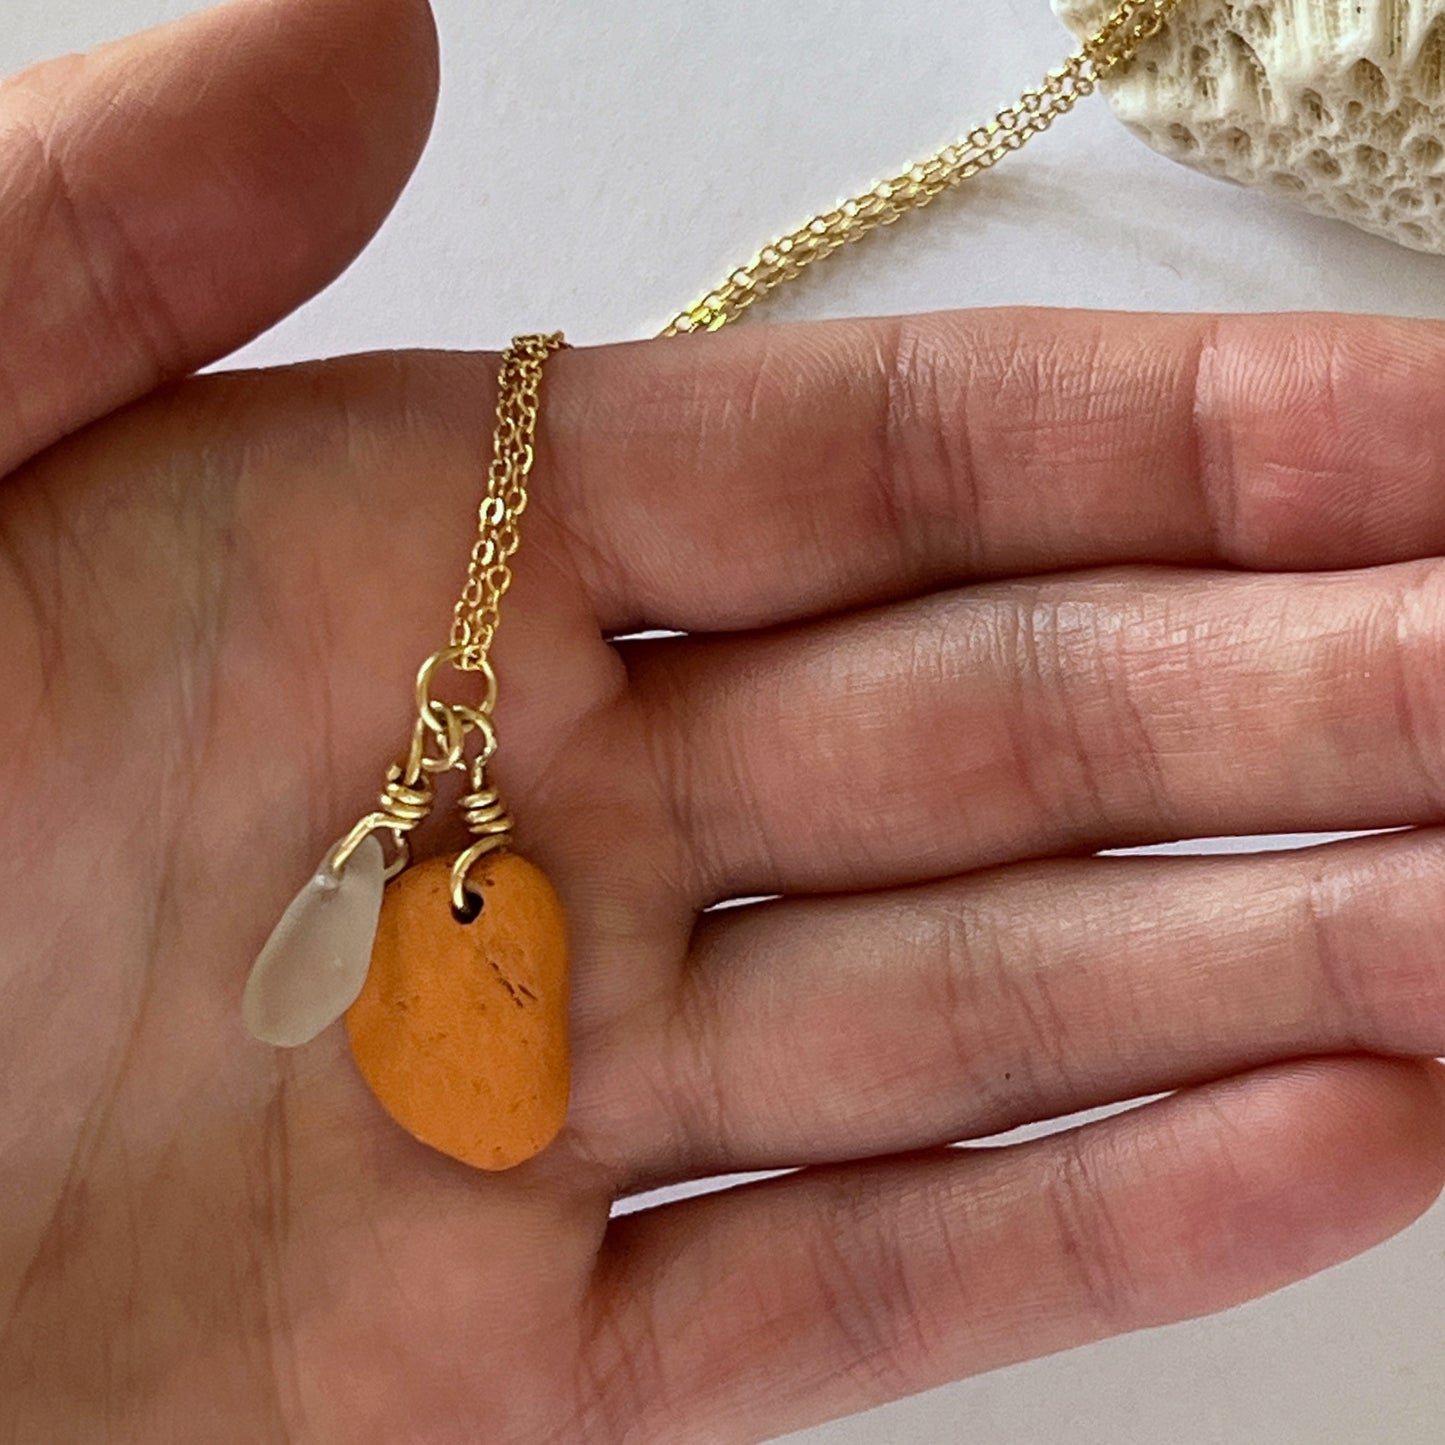 Mermaid Terracotta and Sea Glass Necklace (Portugal)